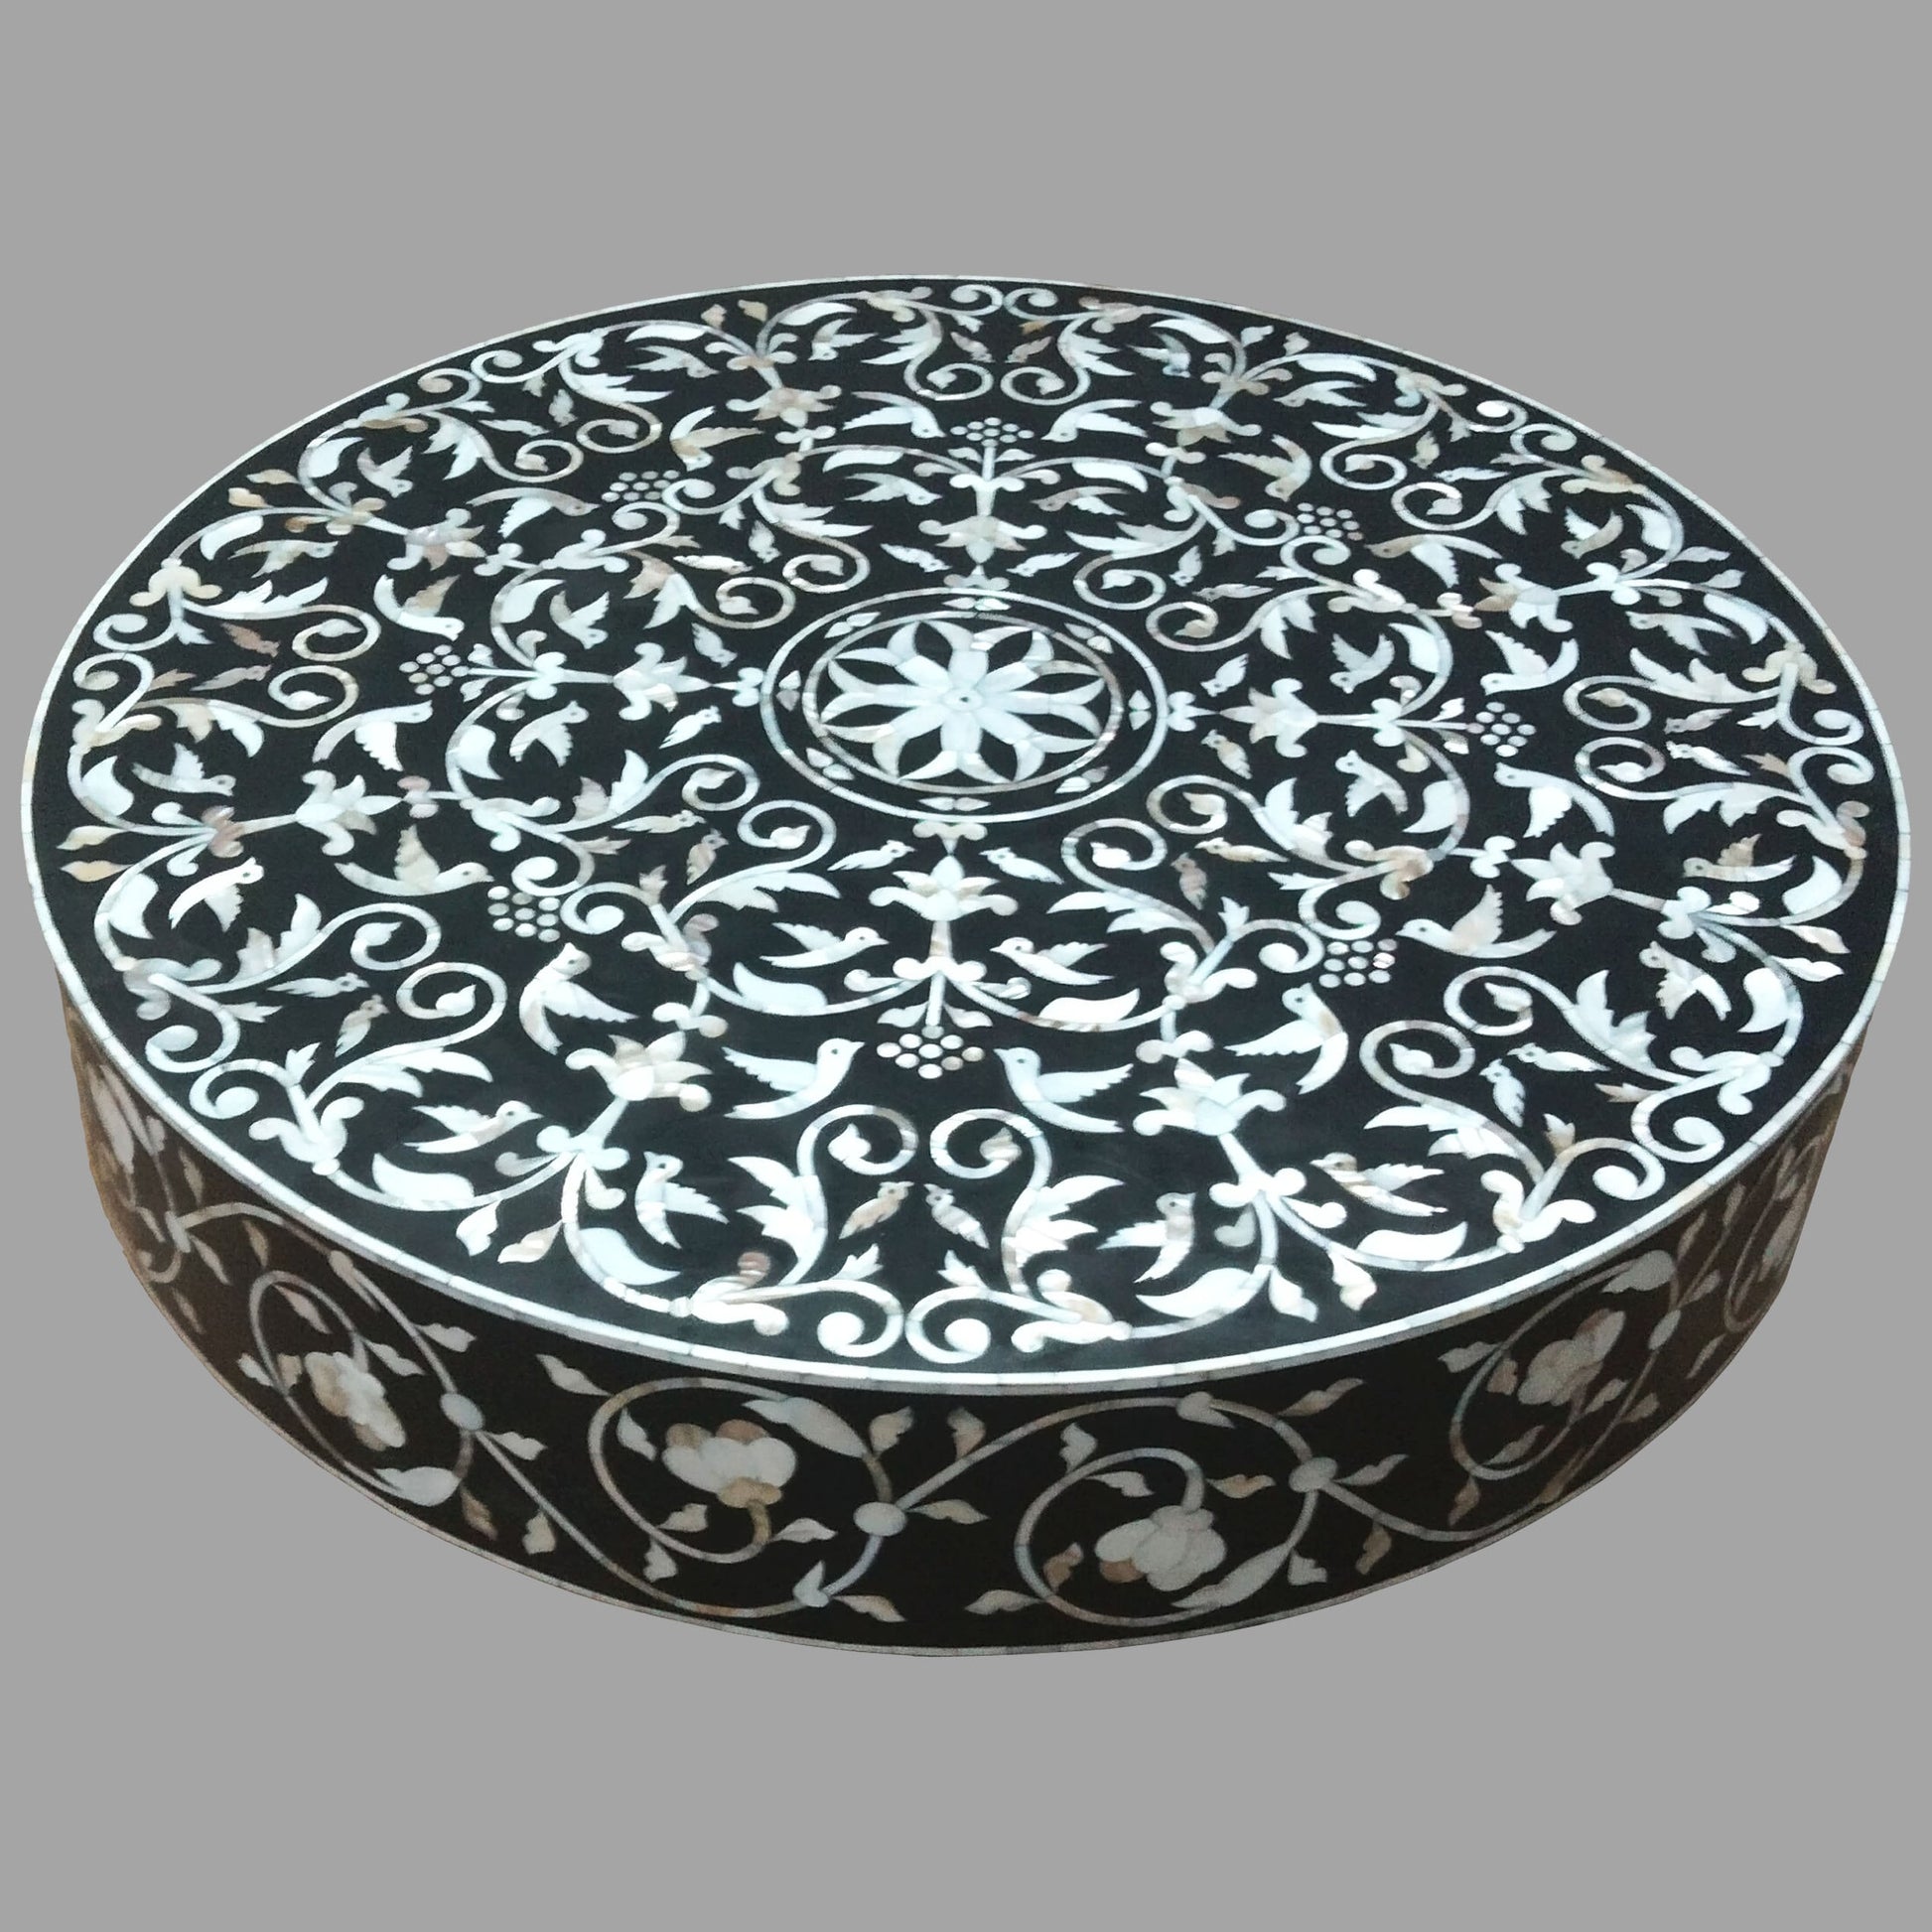 Mother of pearl handmade black coffee Table, Mother of pearl round coffee table, Black handmade coffee table, MOP coffee table black